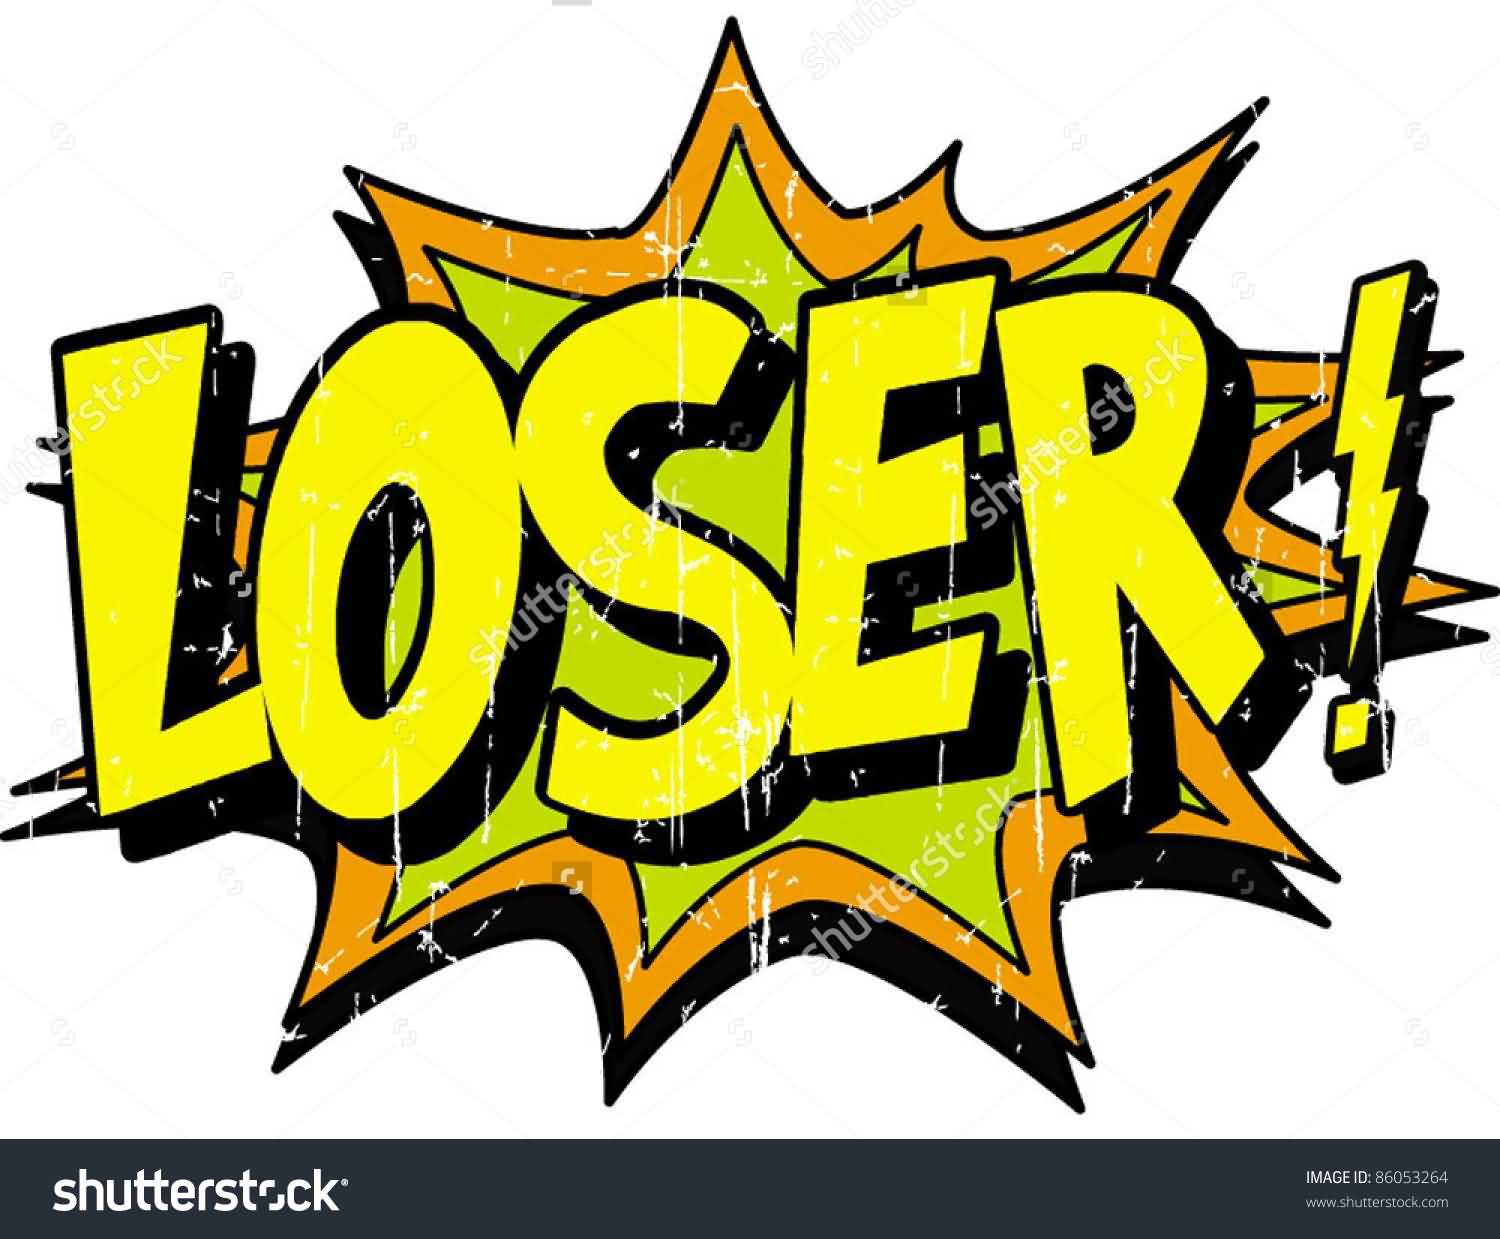 Loser Logo - 45+ Best Loser Pictures And Images